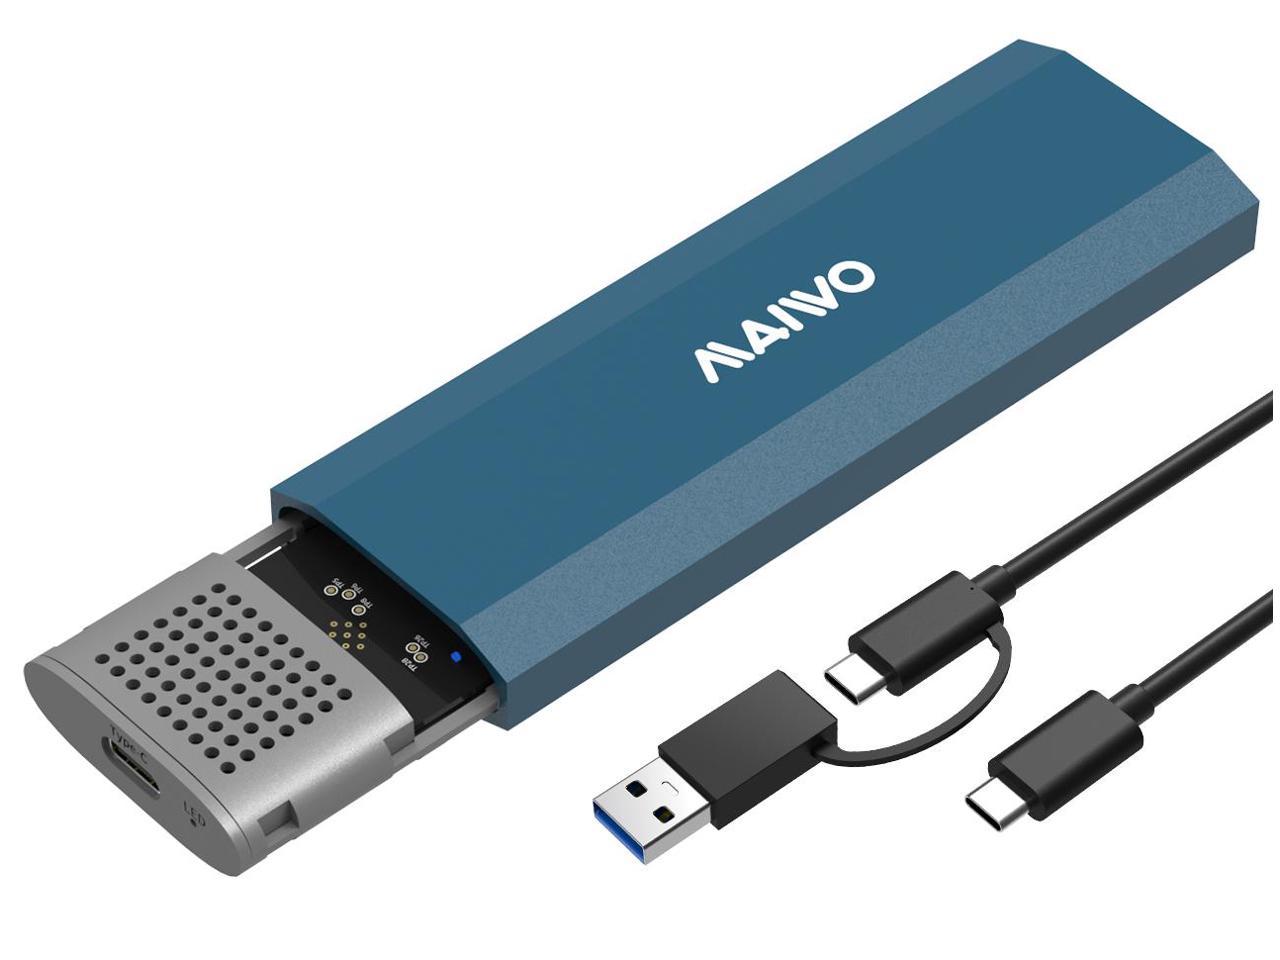 MAIWO NVME SSD Enclosure Adapter Tool-Free, RTL9210B Chips, USB C 3.1 Gen 2 10Gbps NVME, 6Gbps SATA M-Key(B+M Key), External Solid State Drive Support UASP Trim for 2242/2260/2280 SSD -